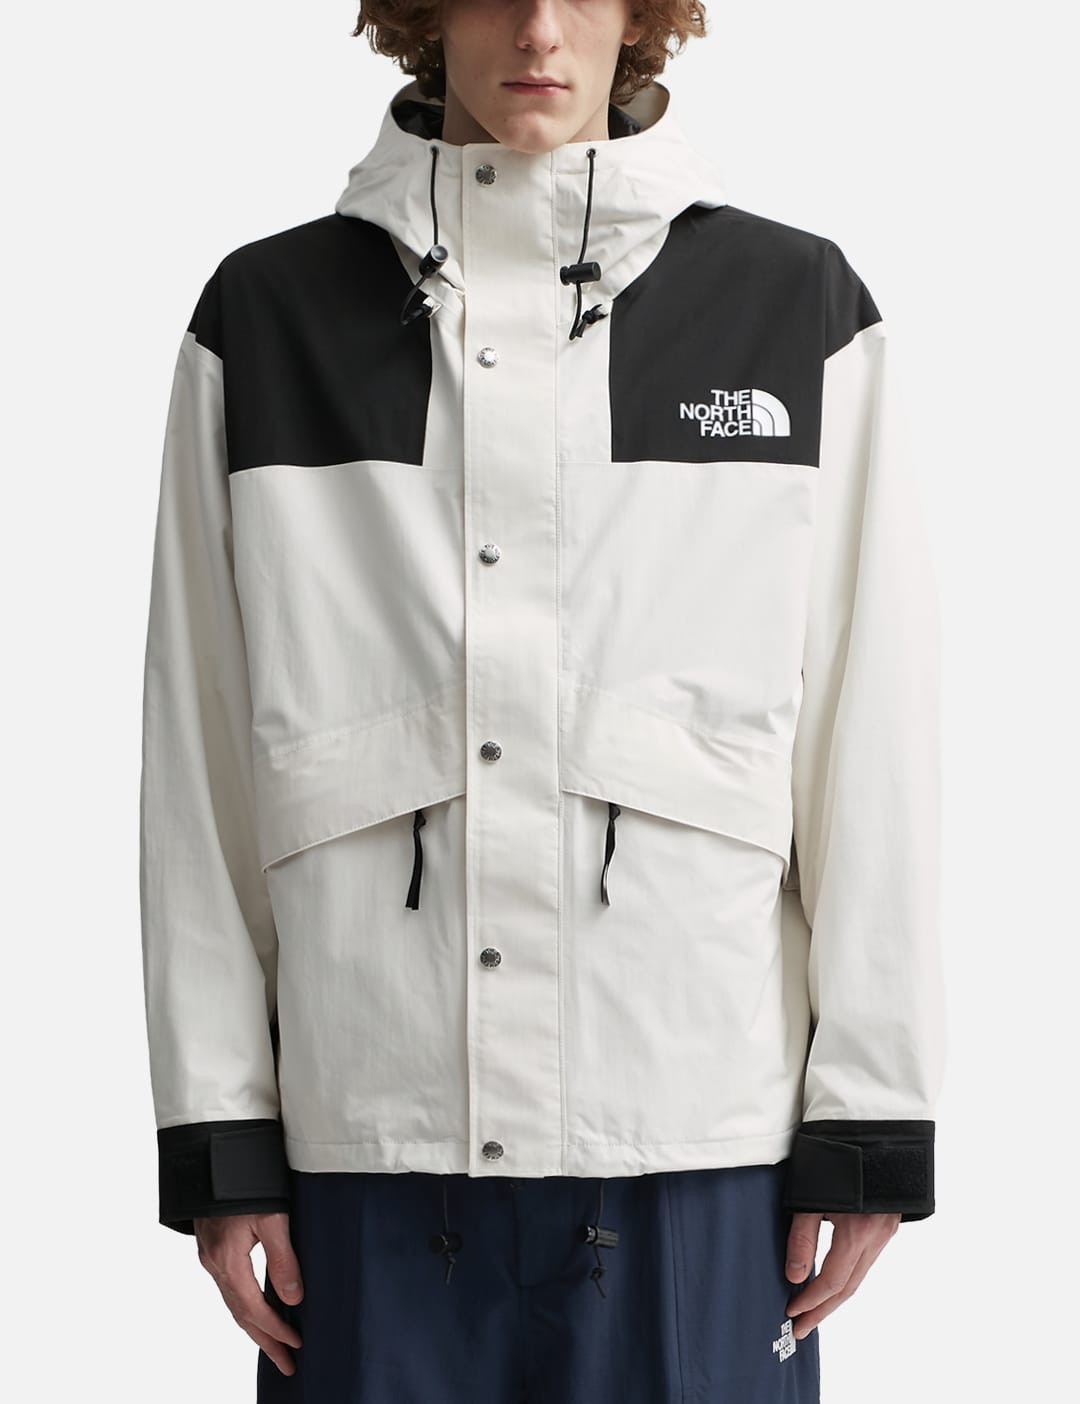 The North Face - 86 Retro Mountain Jacket | HBX - Globally Curated